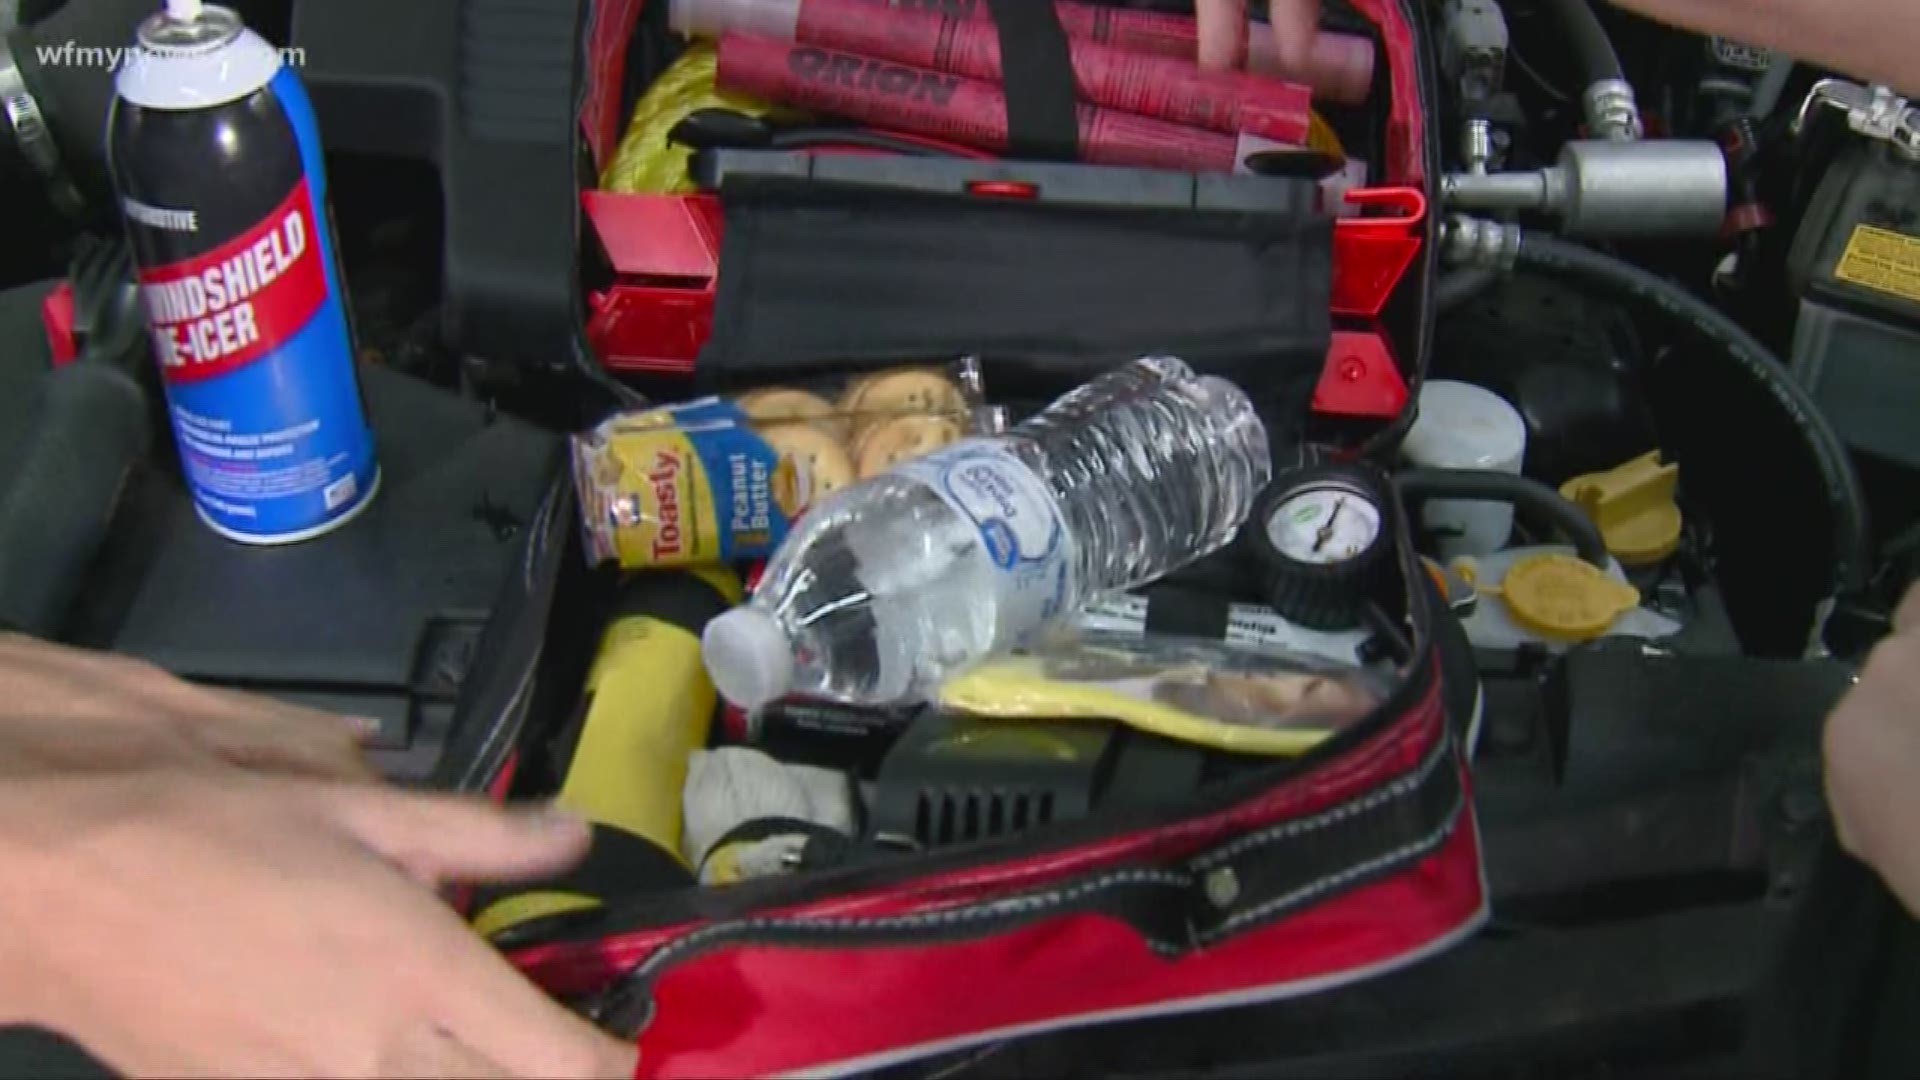 The number one way to ensure your car is ready for winter is to check your fluid levels.